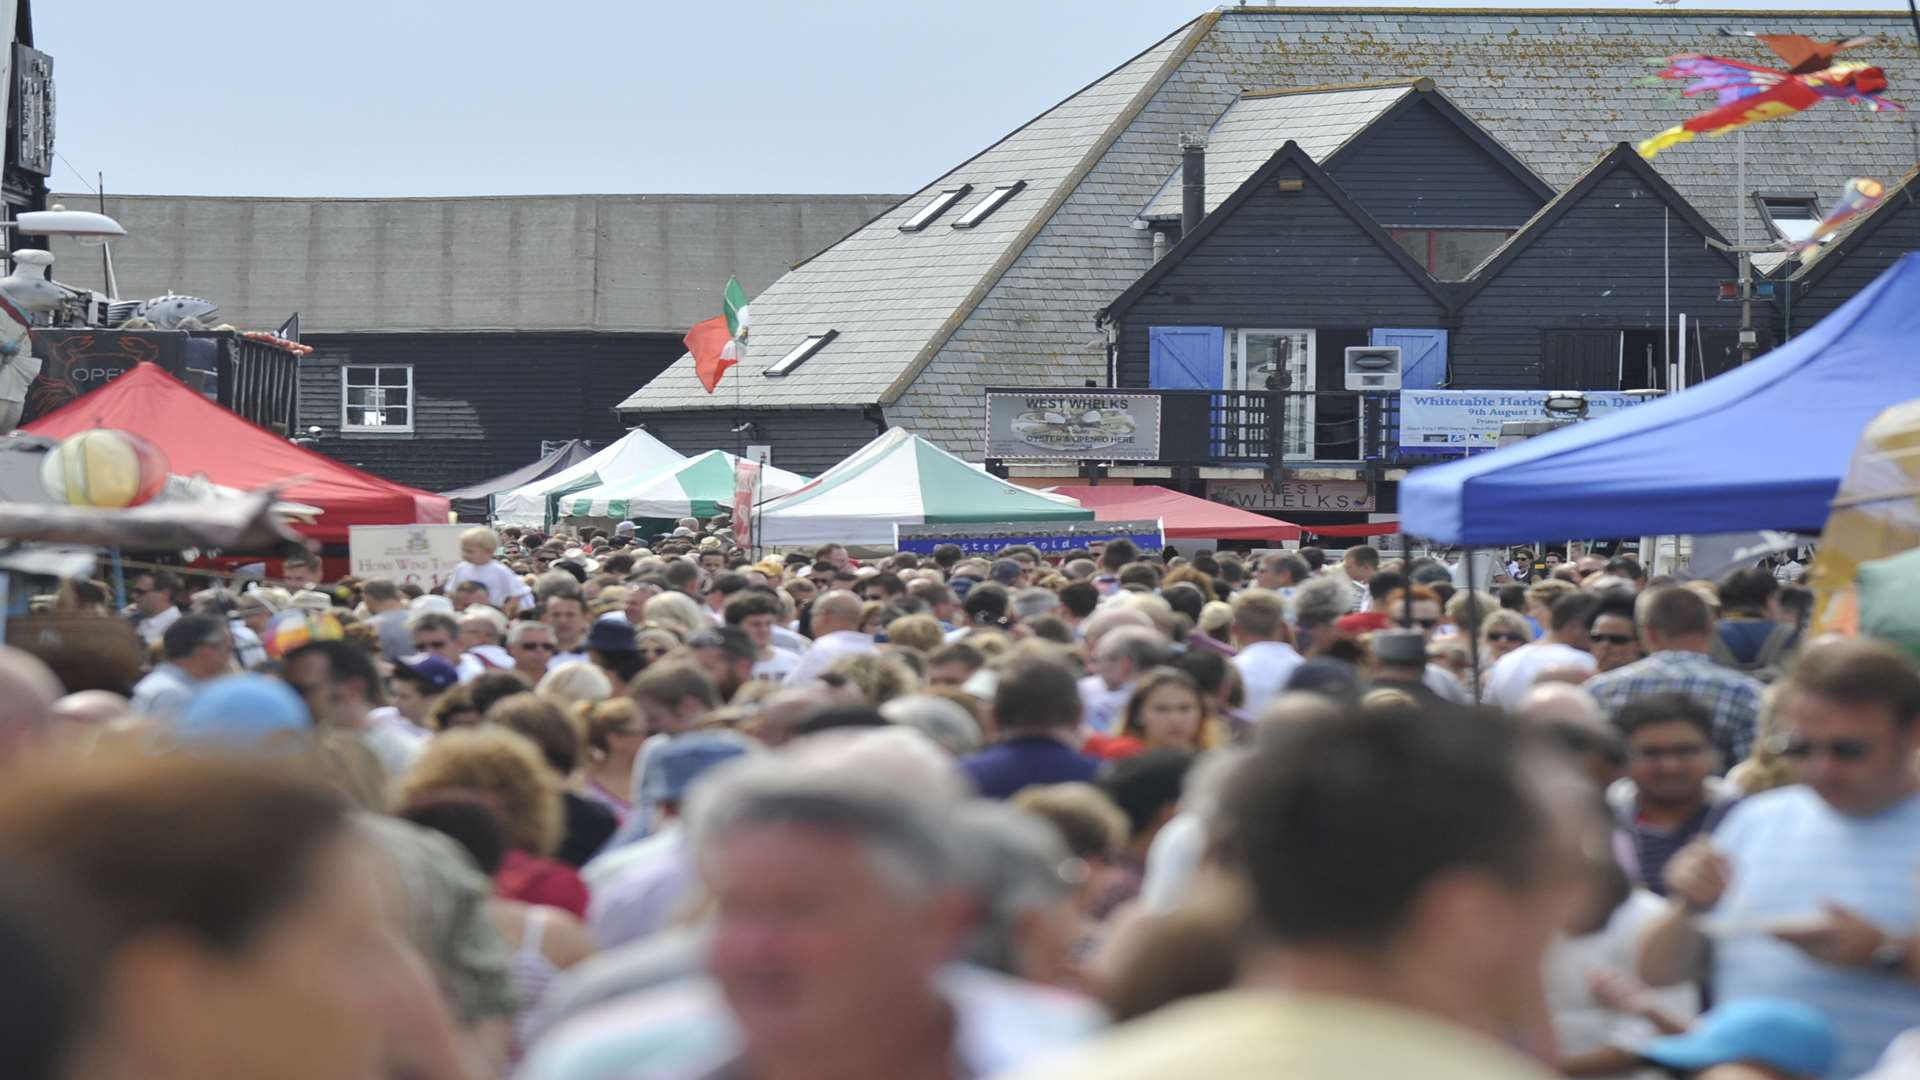 Thousands of visitors come to town for the annual Whitstable Oyster Festival